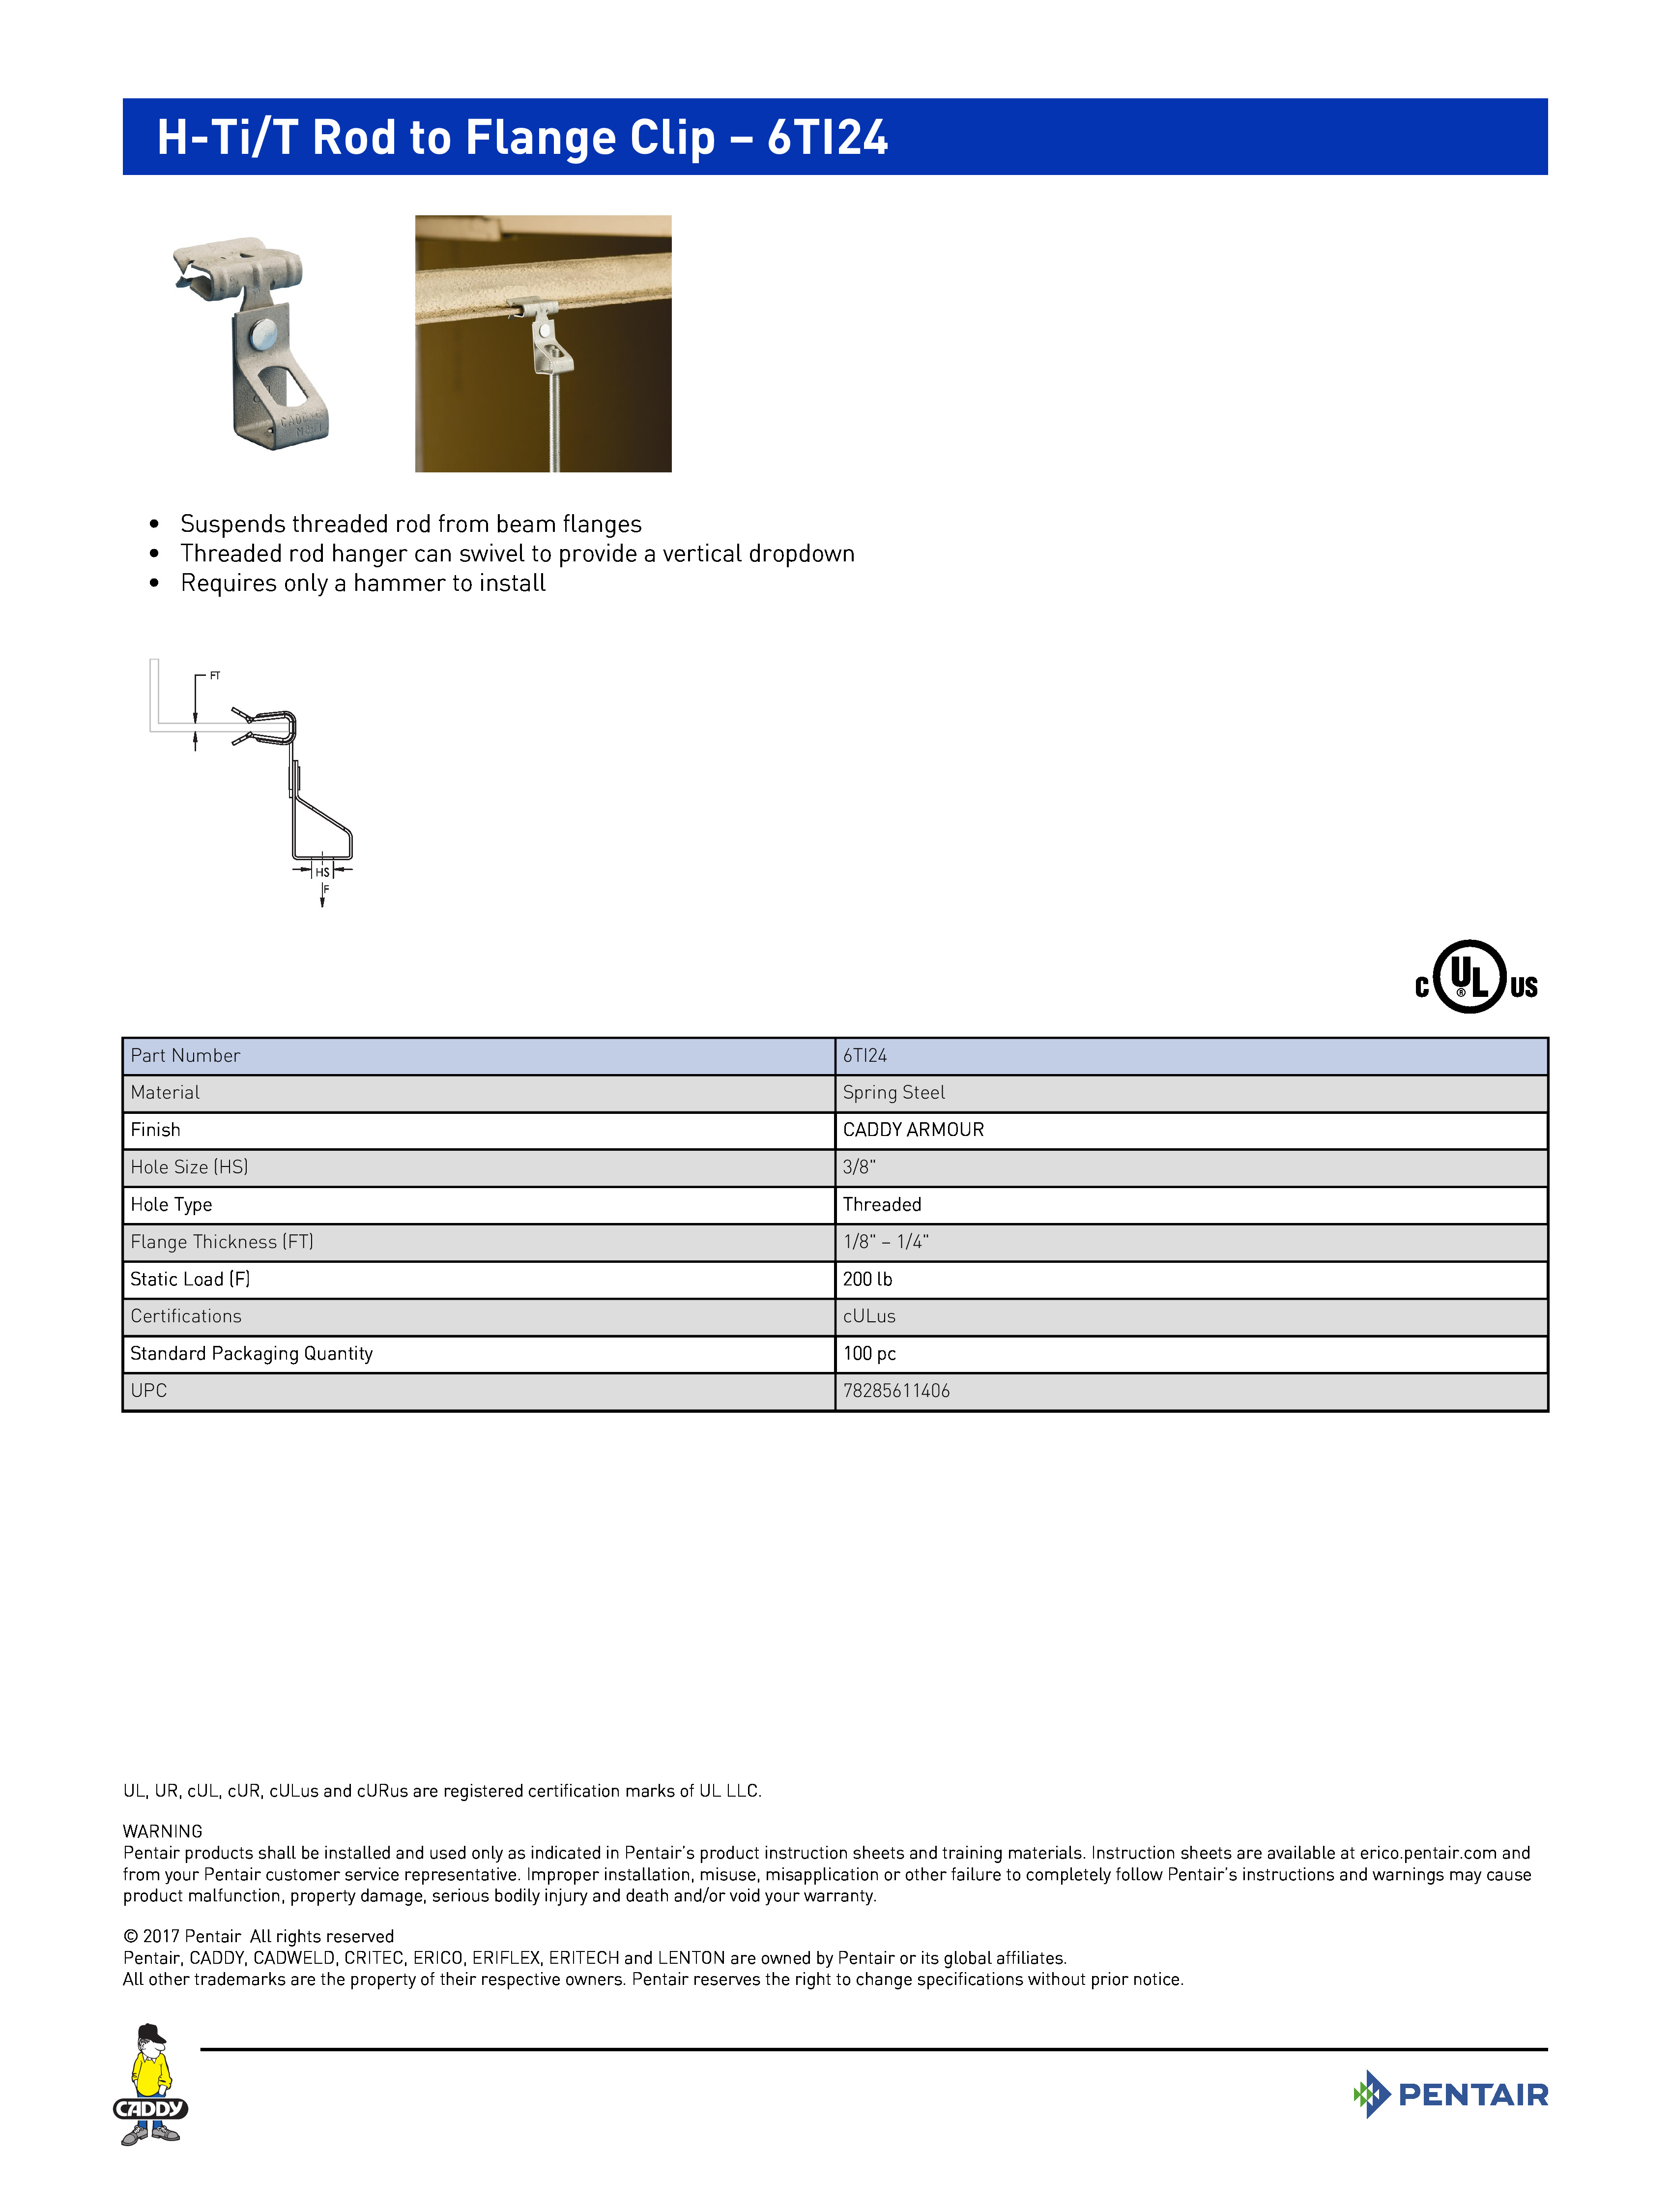 H-Ti/T Rod to Flange Clip – 6TI24	
 	
•	Suspends threaded rod from beam flanges	
•	Threaded rod hanger can swivel to provide a vertical dropdown	
•	Requires only a hammer to install	
Part Number6TI24MaterialSpring SteelFinishCADDY ARMOURHole Size (HS)3/8"Hole TypeThreadedFlange Thickness (FT)1/8" – 1/4"Static Load (F)200 lbCertificationscULusStandard Packaging Quantity100 pcUPC78285611406
UL, UR, cUL, cUR, cULus and cURus are registered certification marks of UL LLC. WARNINGPentair products shall be installed and used only as indicated in Pentair’s product instruction sheets and training materials. Instruction sheets are available at erico.pentair.com andfrom your Pentair customer service representative. Improper installation, misuse, misapplication or other failure to completely follow Pentair’s instructions and warnings may causeproduct malfunction, property damage, serious bodily injury and death and/or void your warranty. 